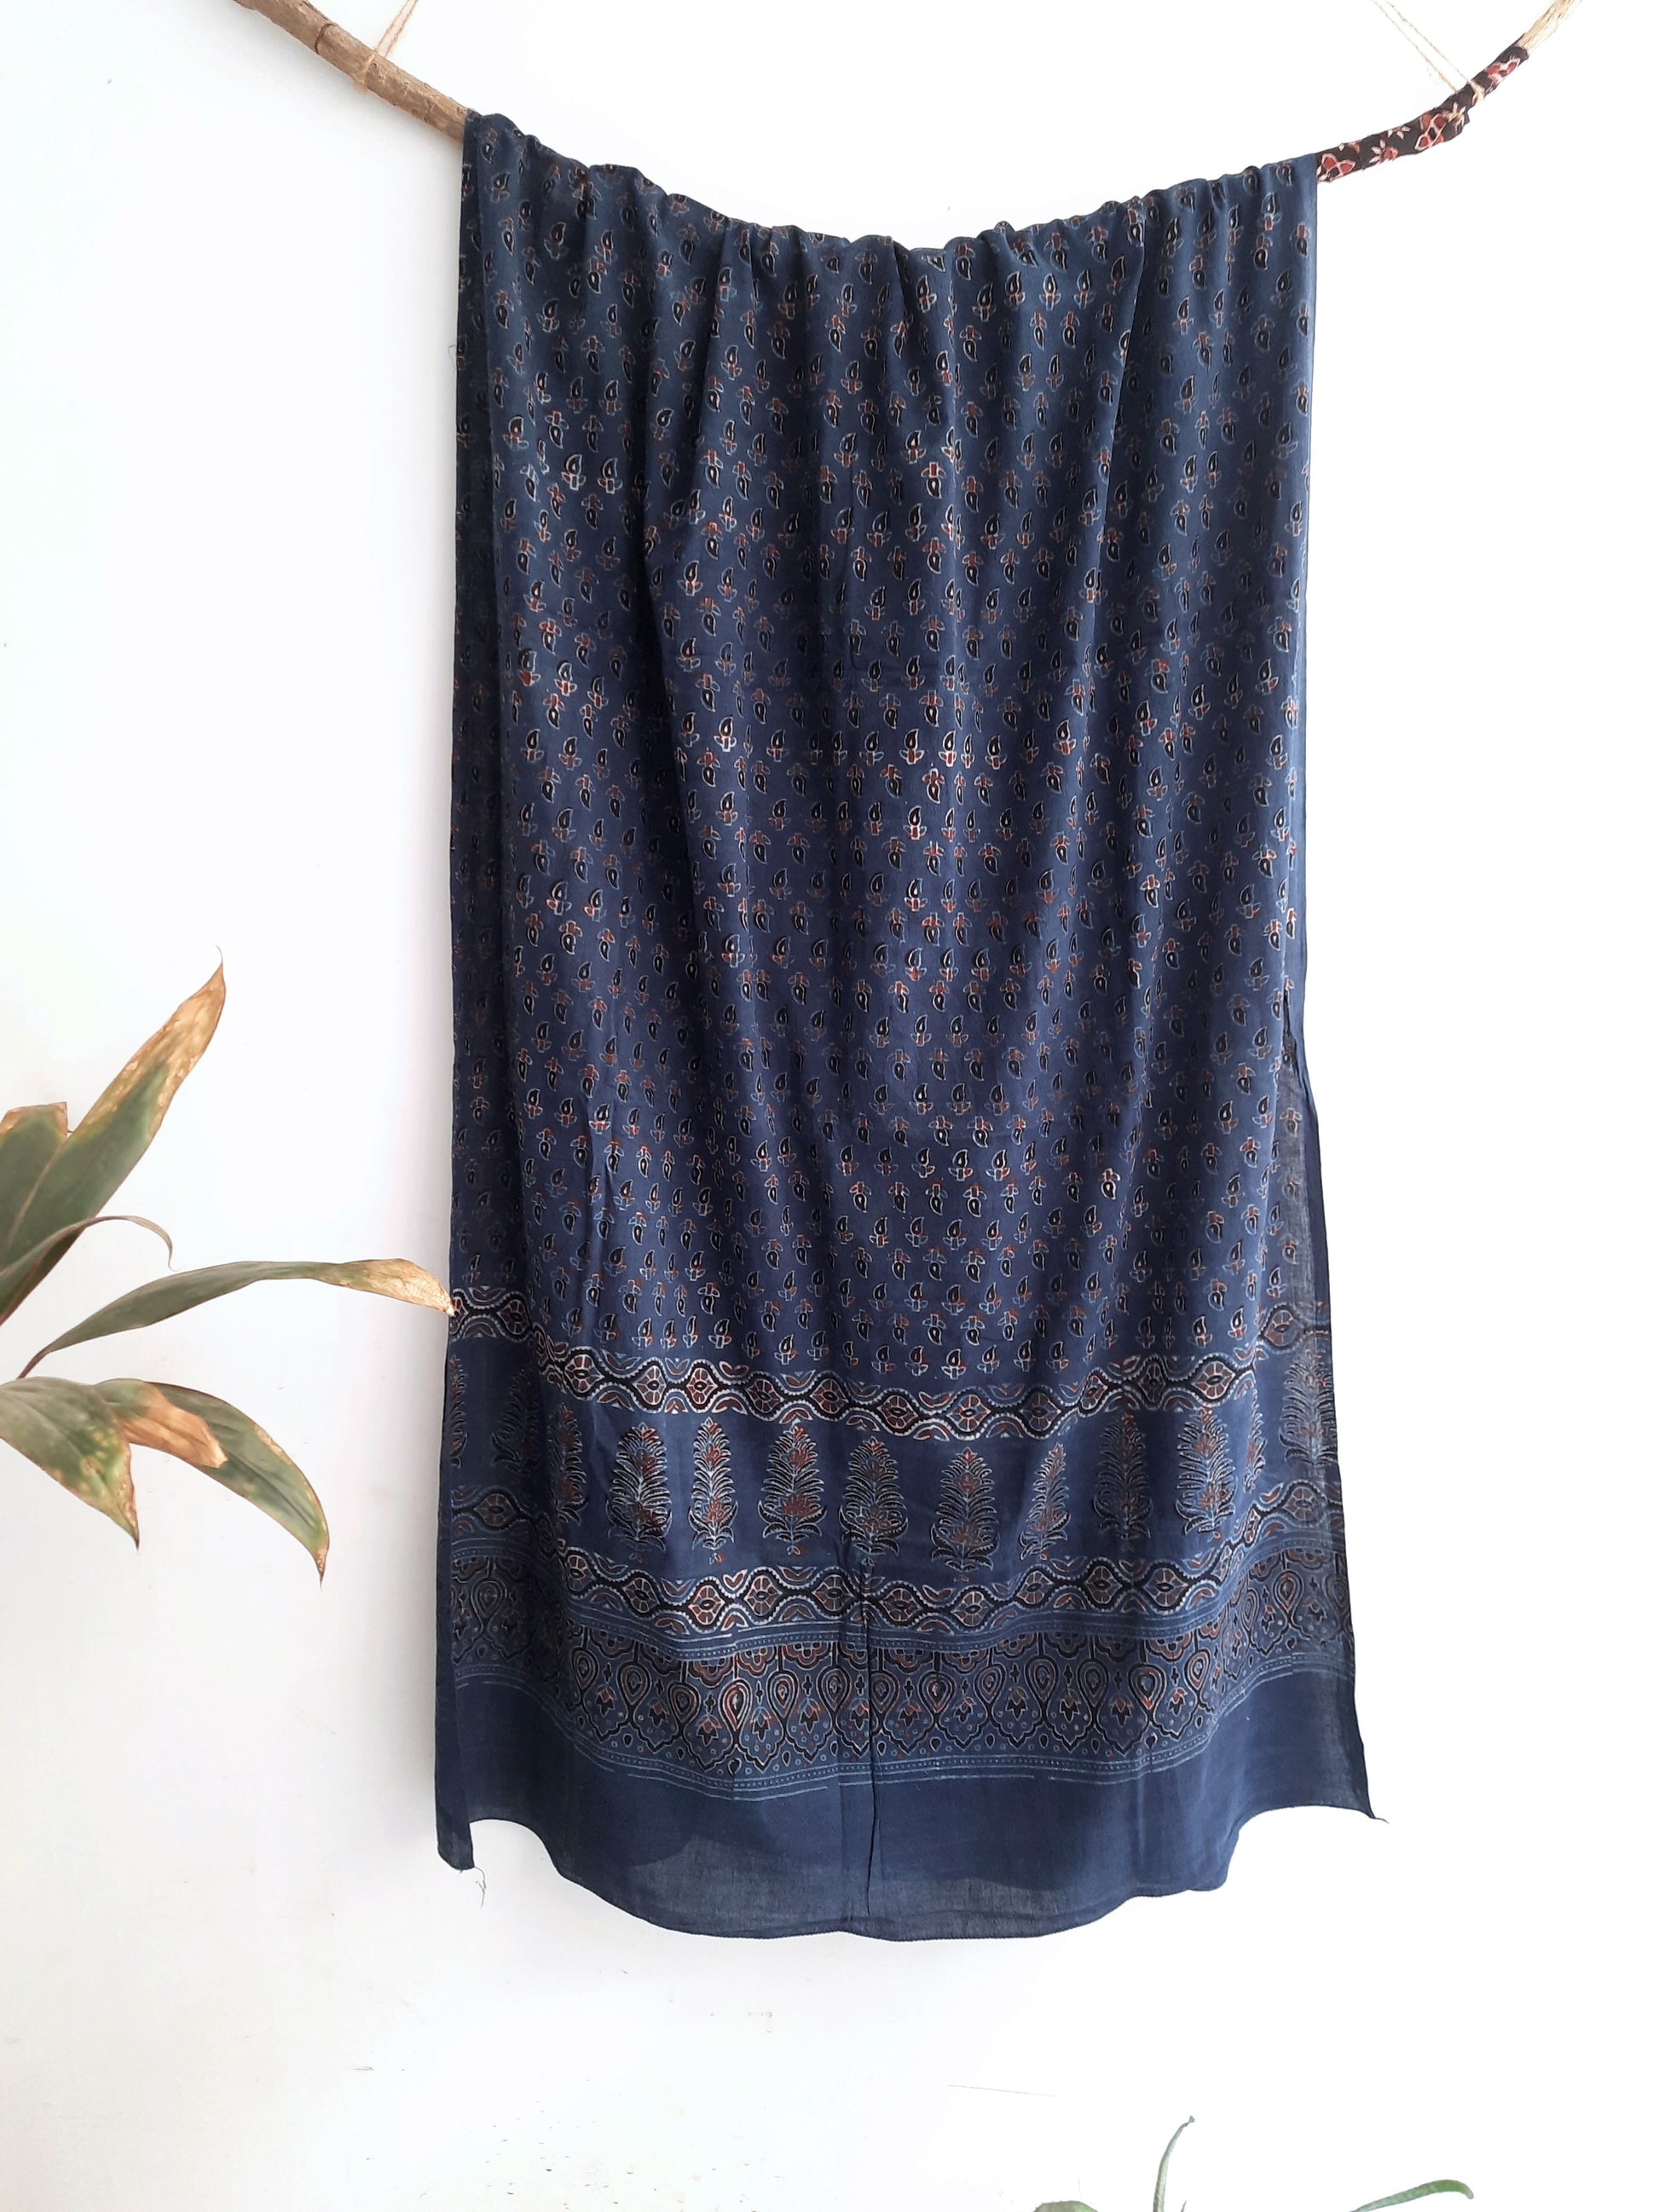 Turquoisethestore's Indigo Ajrakh Cotton Dupatta, hand block printed with traditional techniques. Elevate your summer style with this sustainable and artisanal fashion accessory, perfect for adding charm to any outfit.